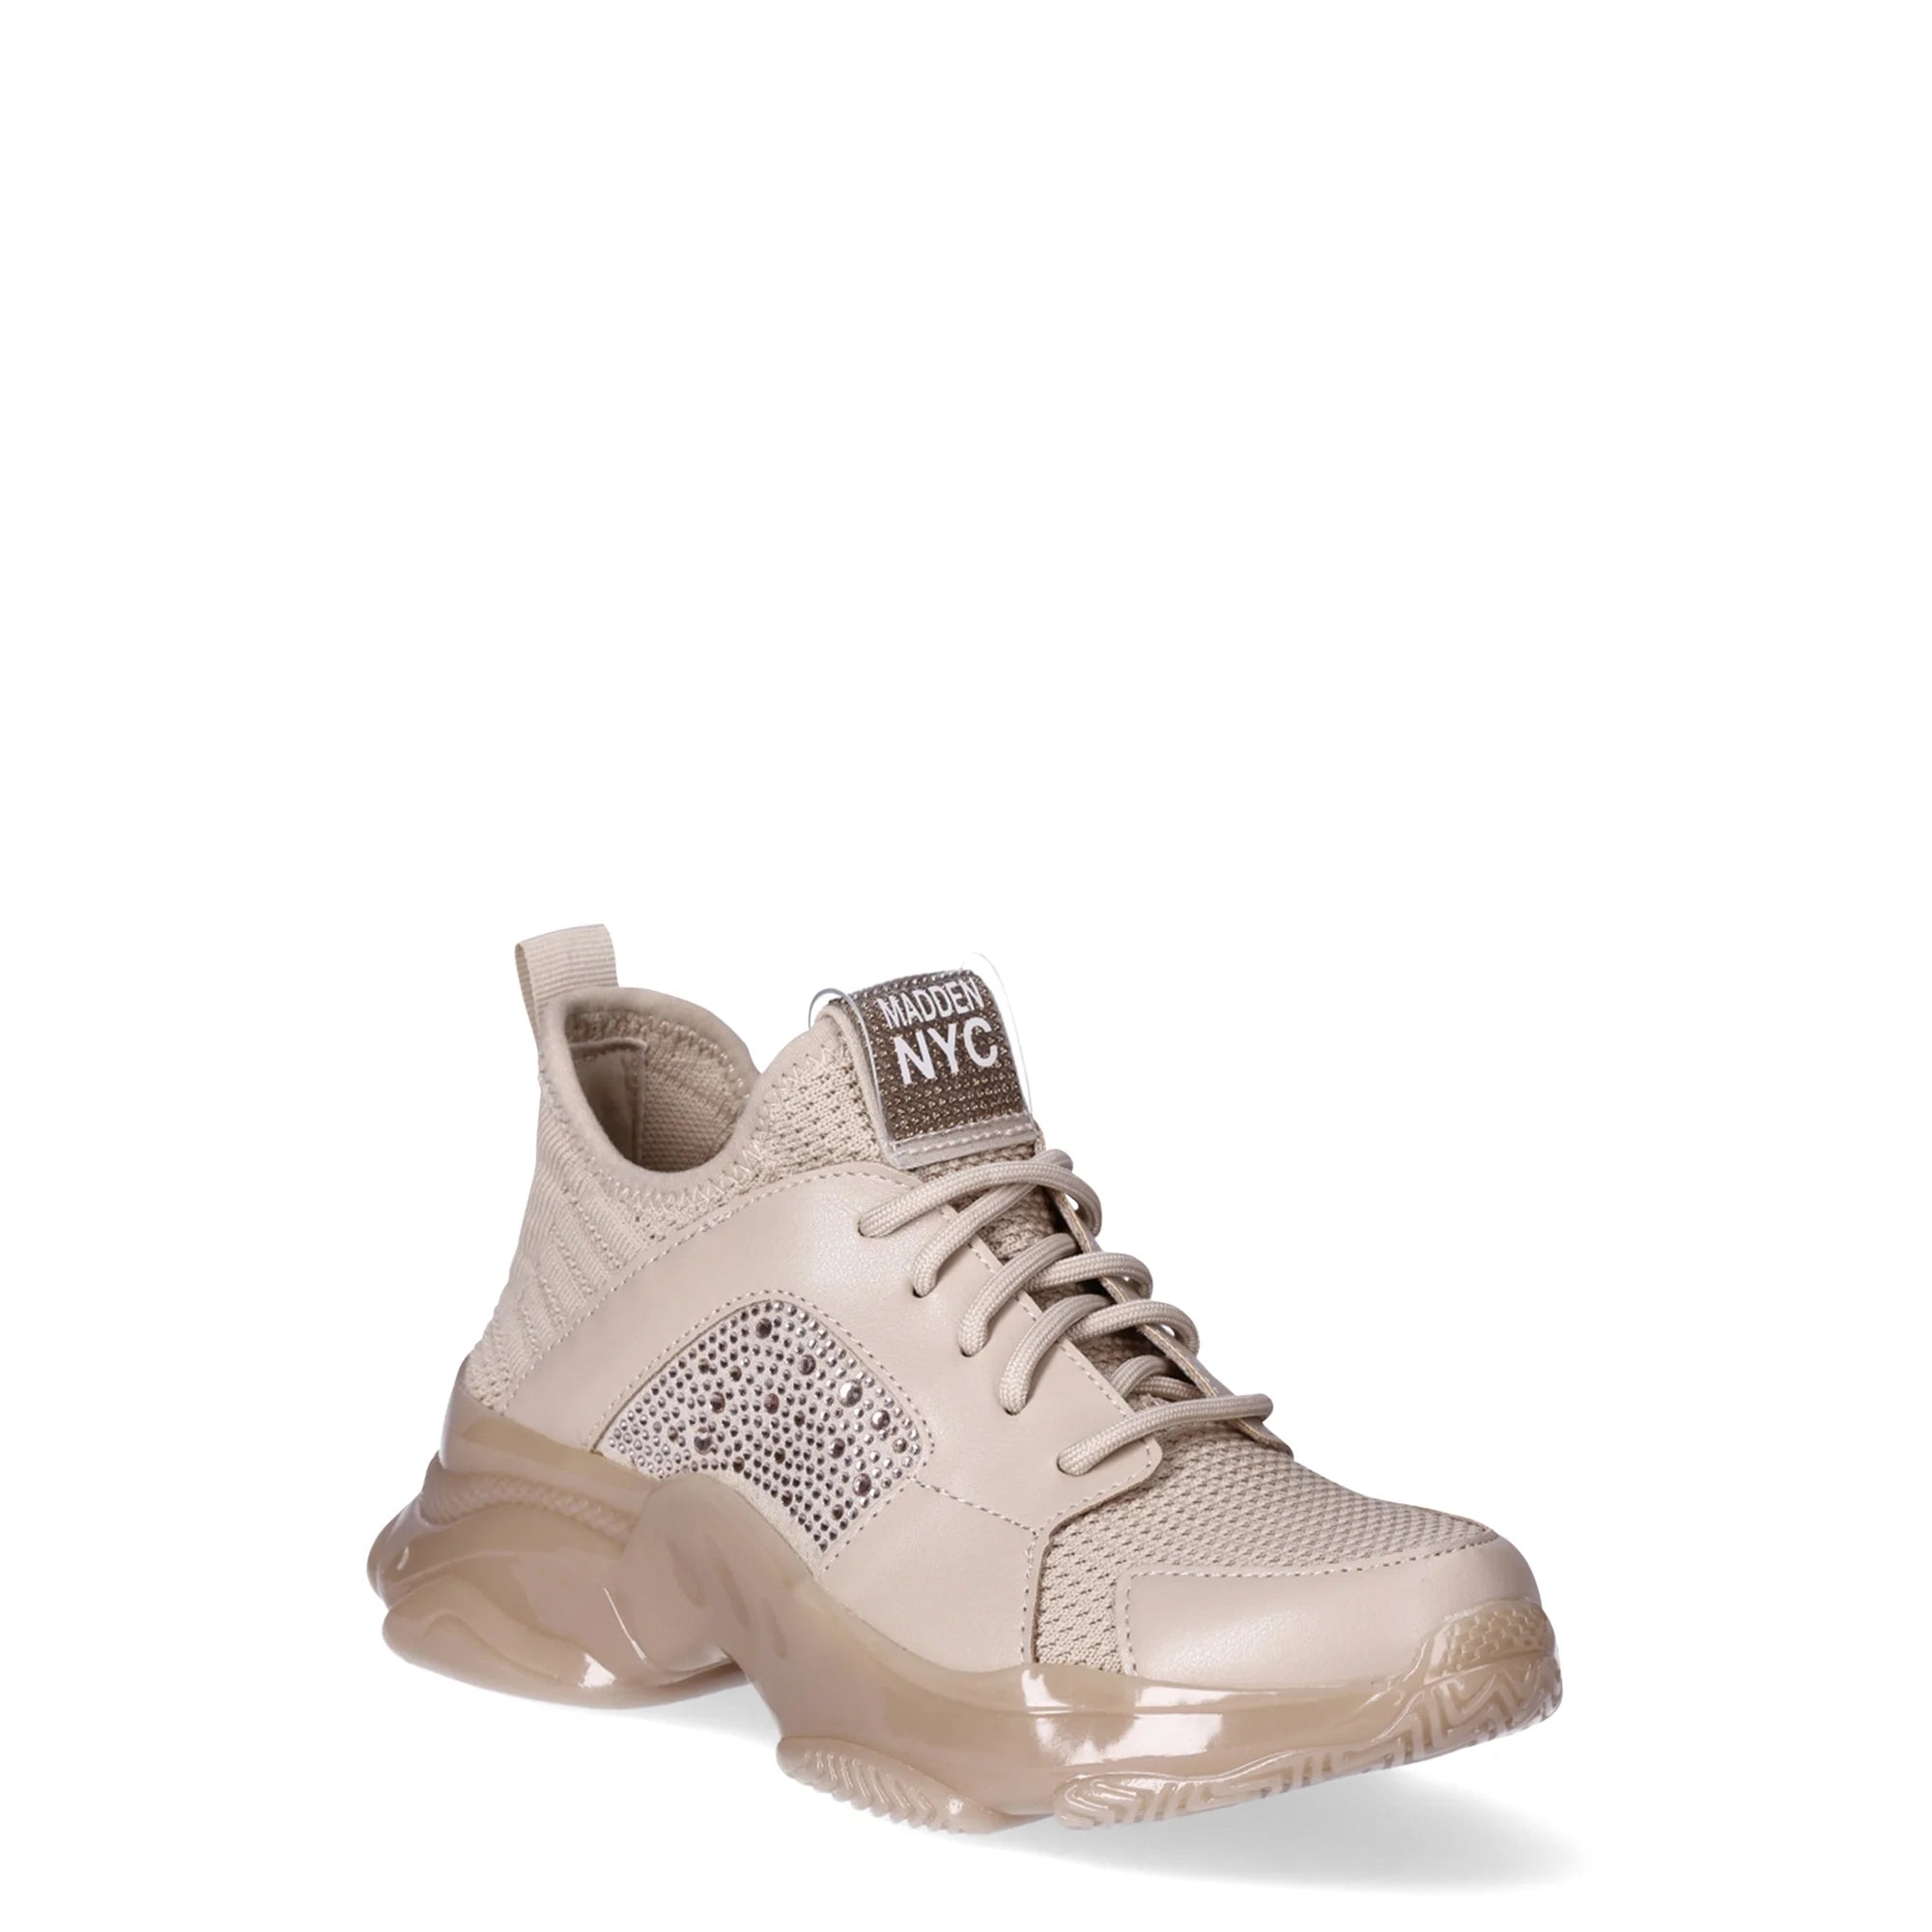 MADDEN NYC EMBELLISHED SNEAKERS IN NUDE